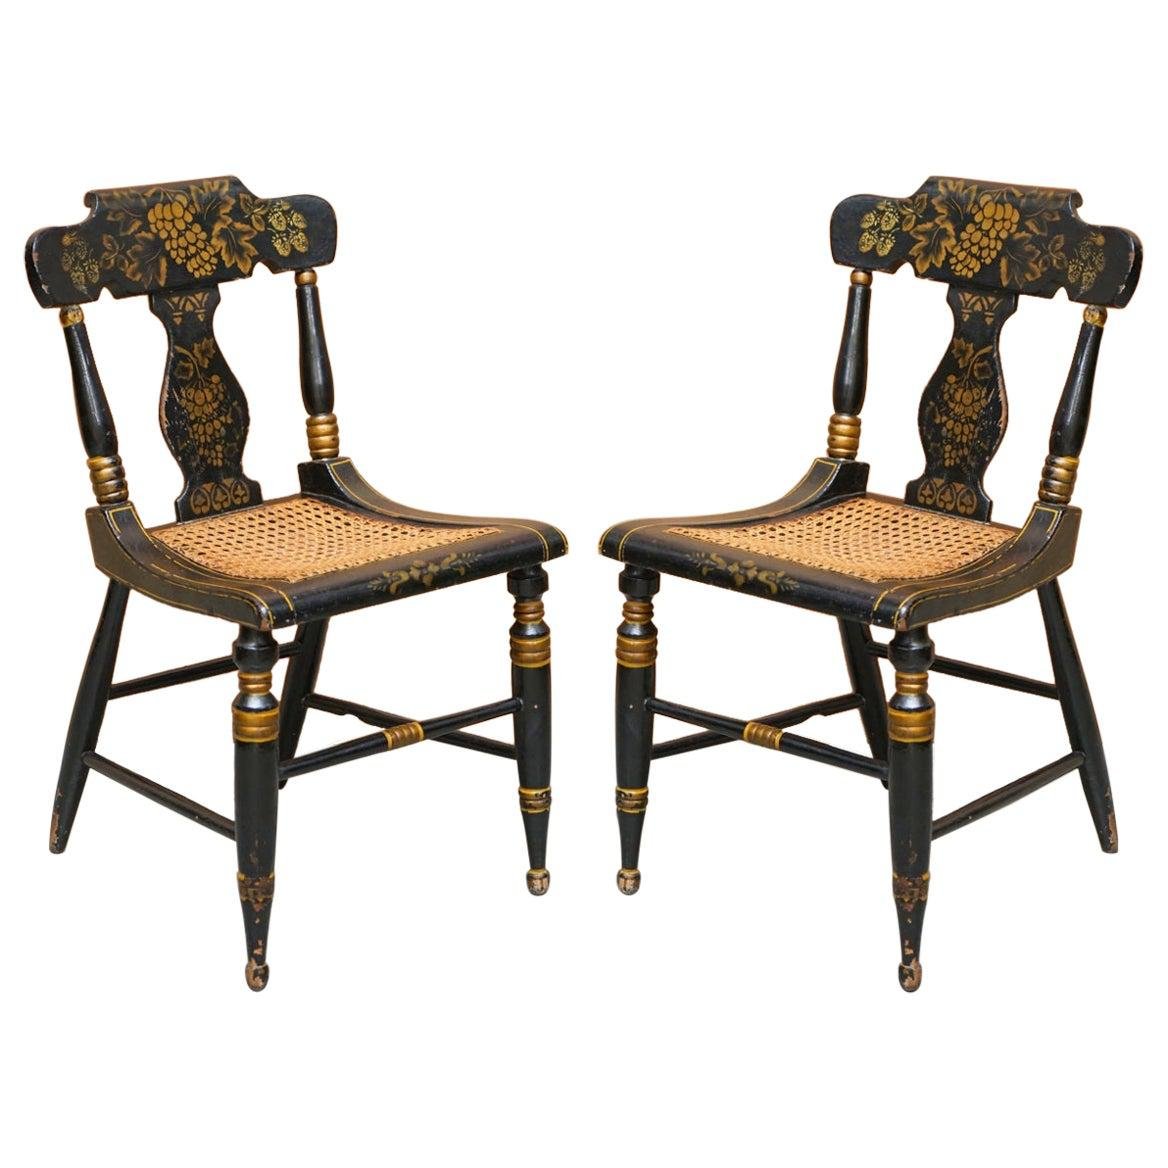 georgian baltimore ebonised painted gilt bergere side chairs 1820s set of 2 GZP-1007184